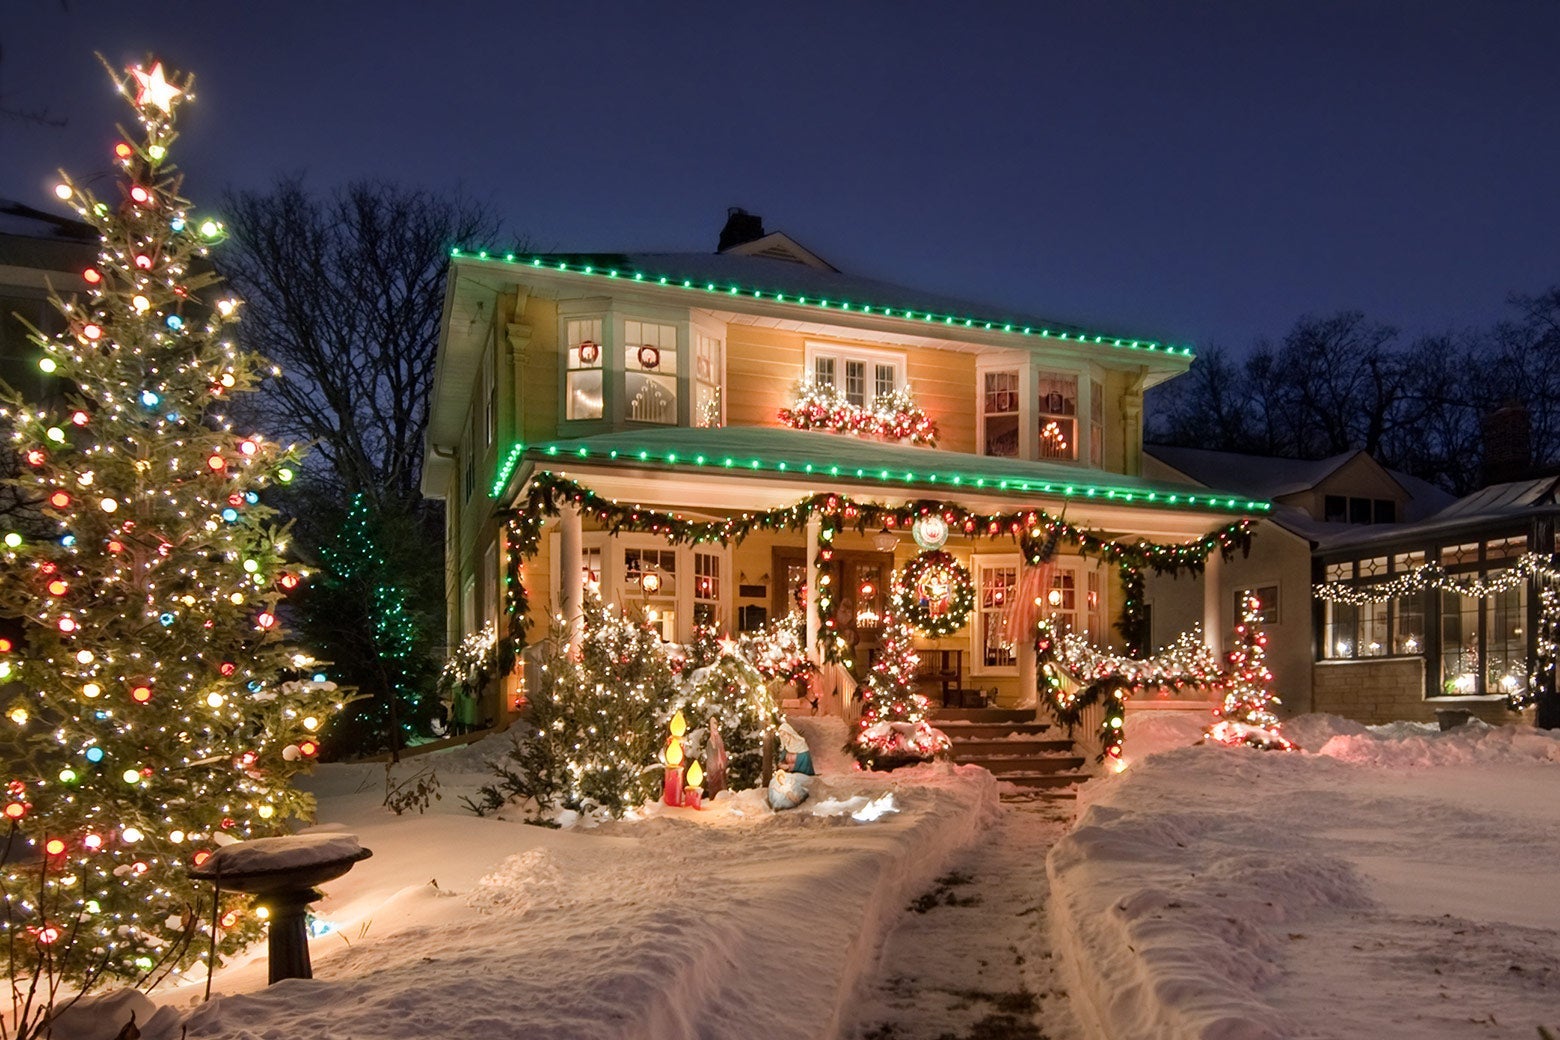 A house with an elaborate holiday light display out front, with multiple Christmas trees on a snow-covered front lawn